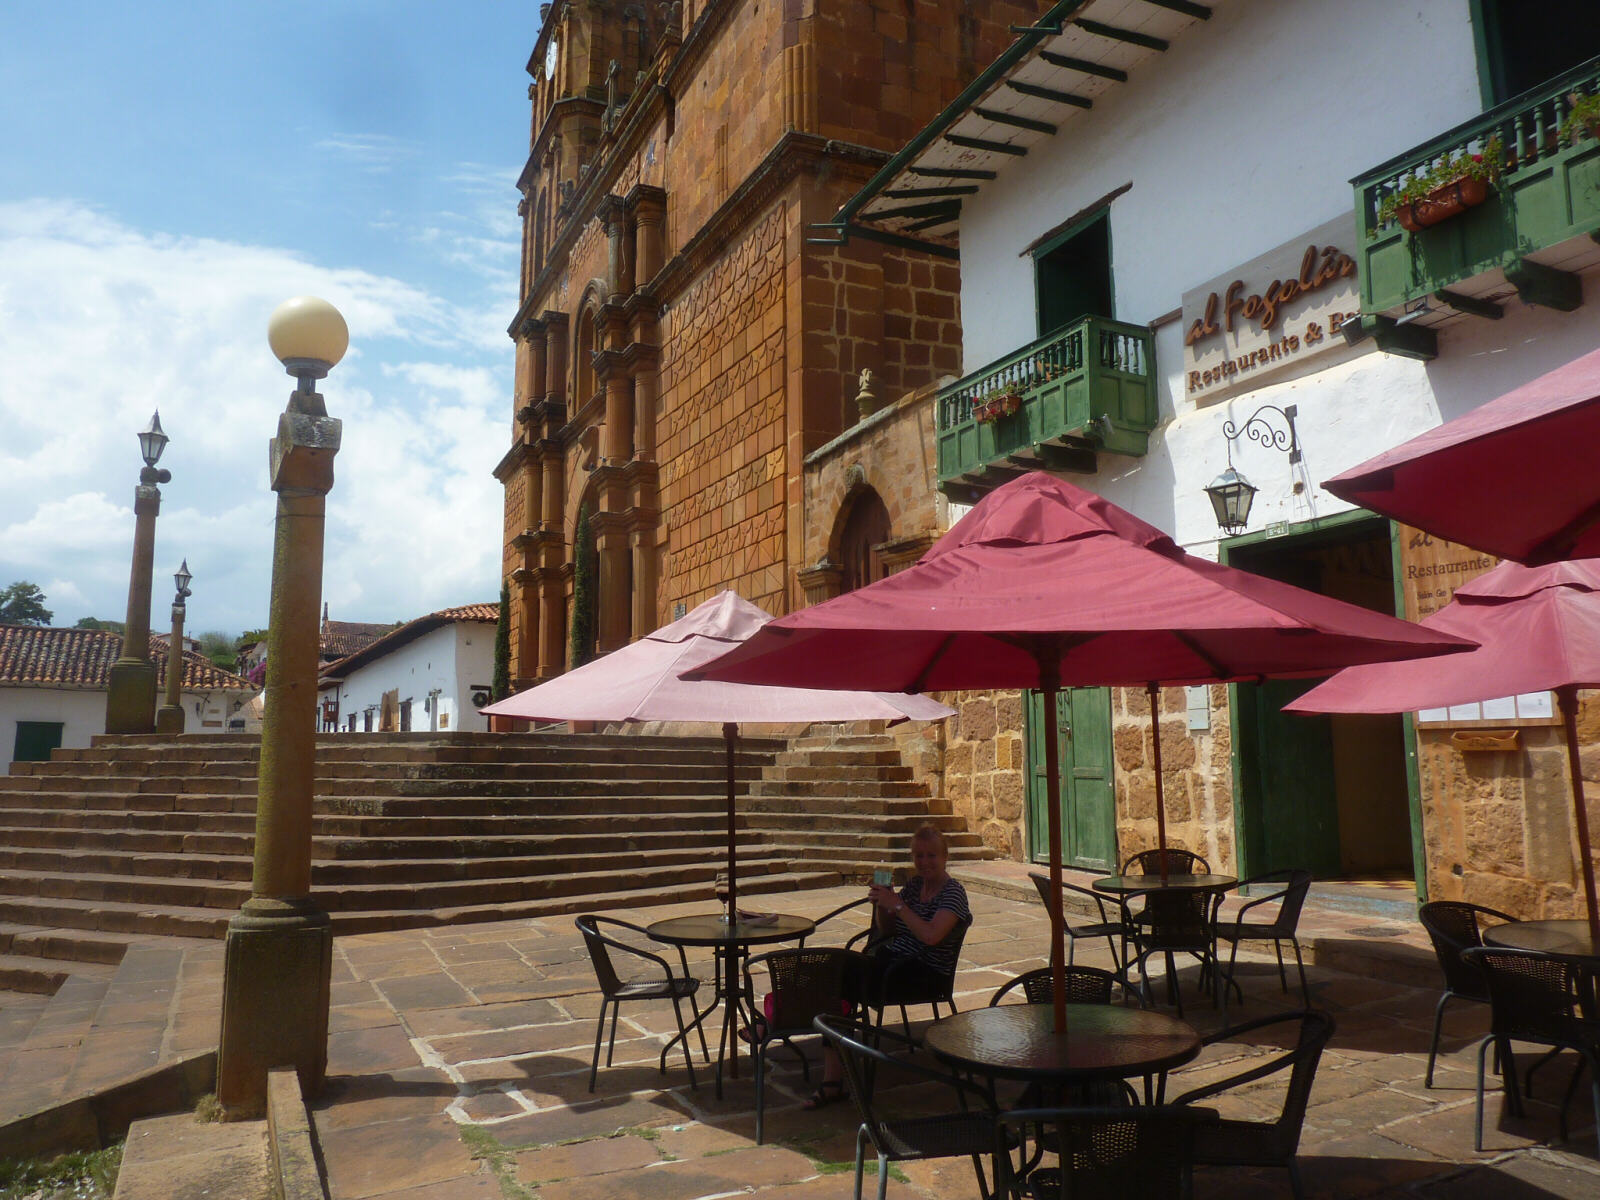 Lunch in the main square in Barichara, Colombia